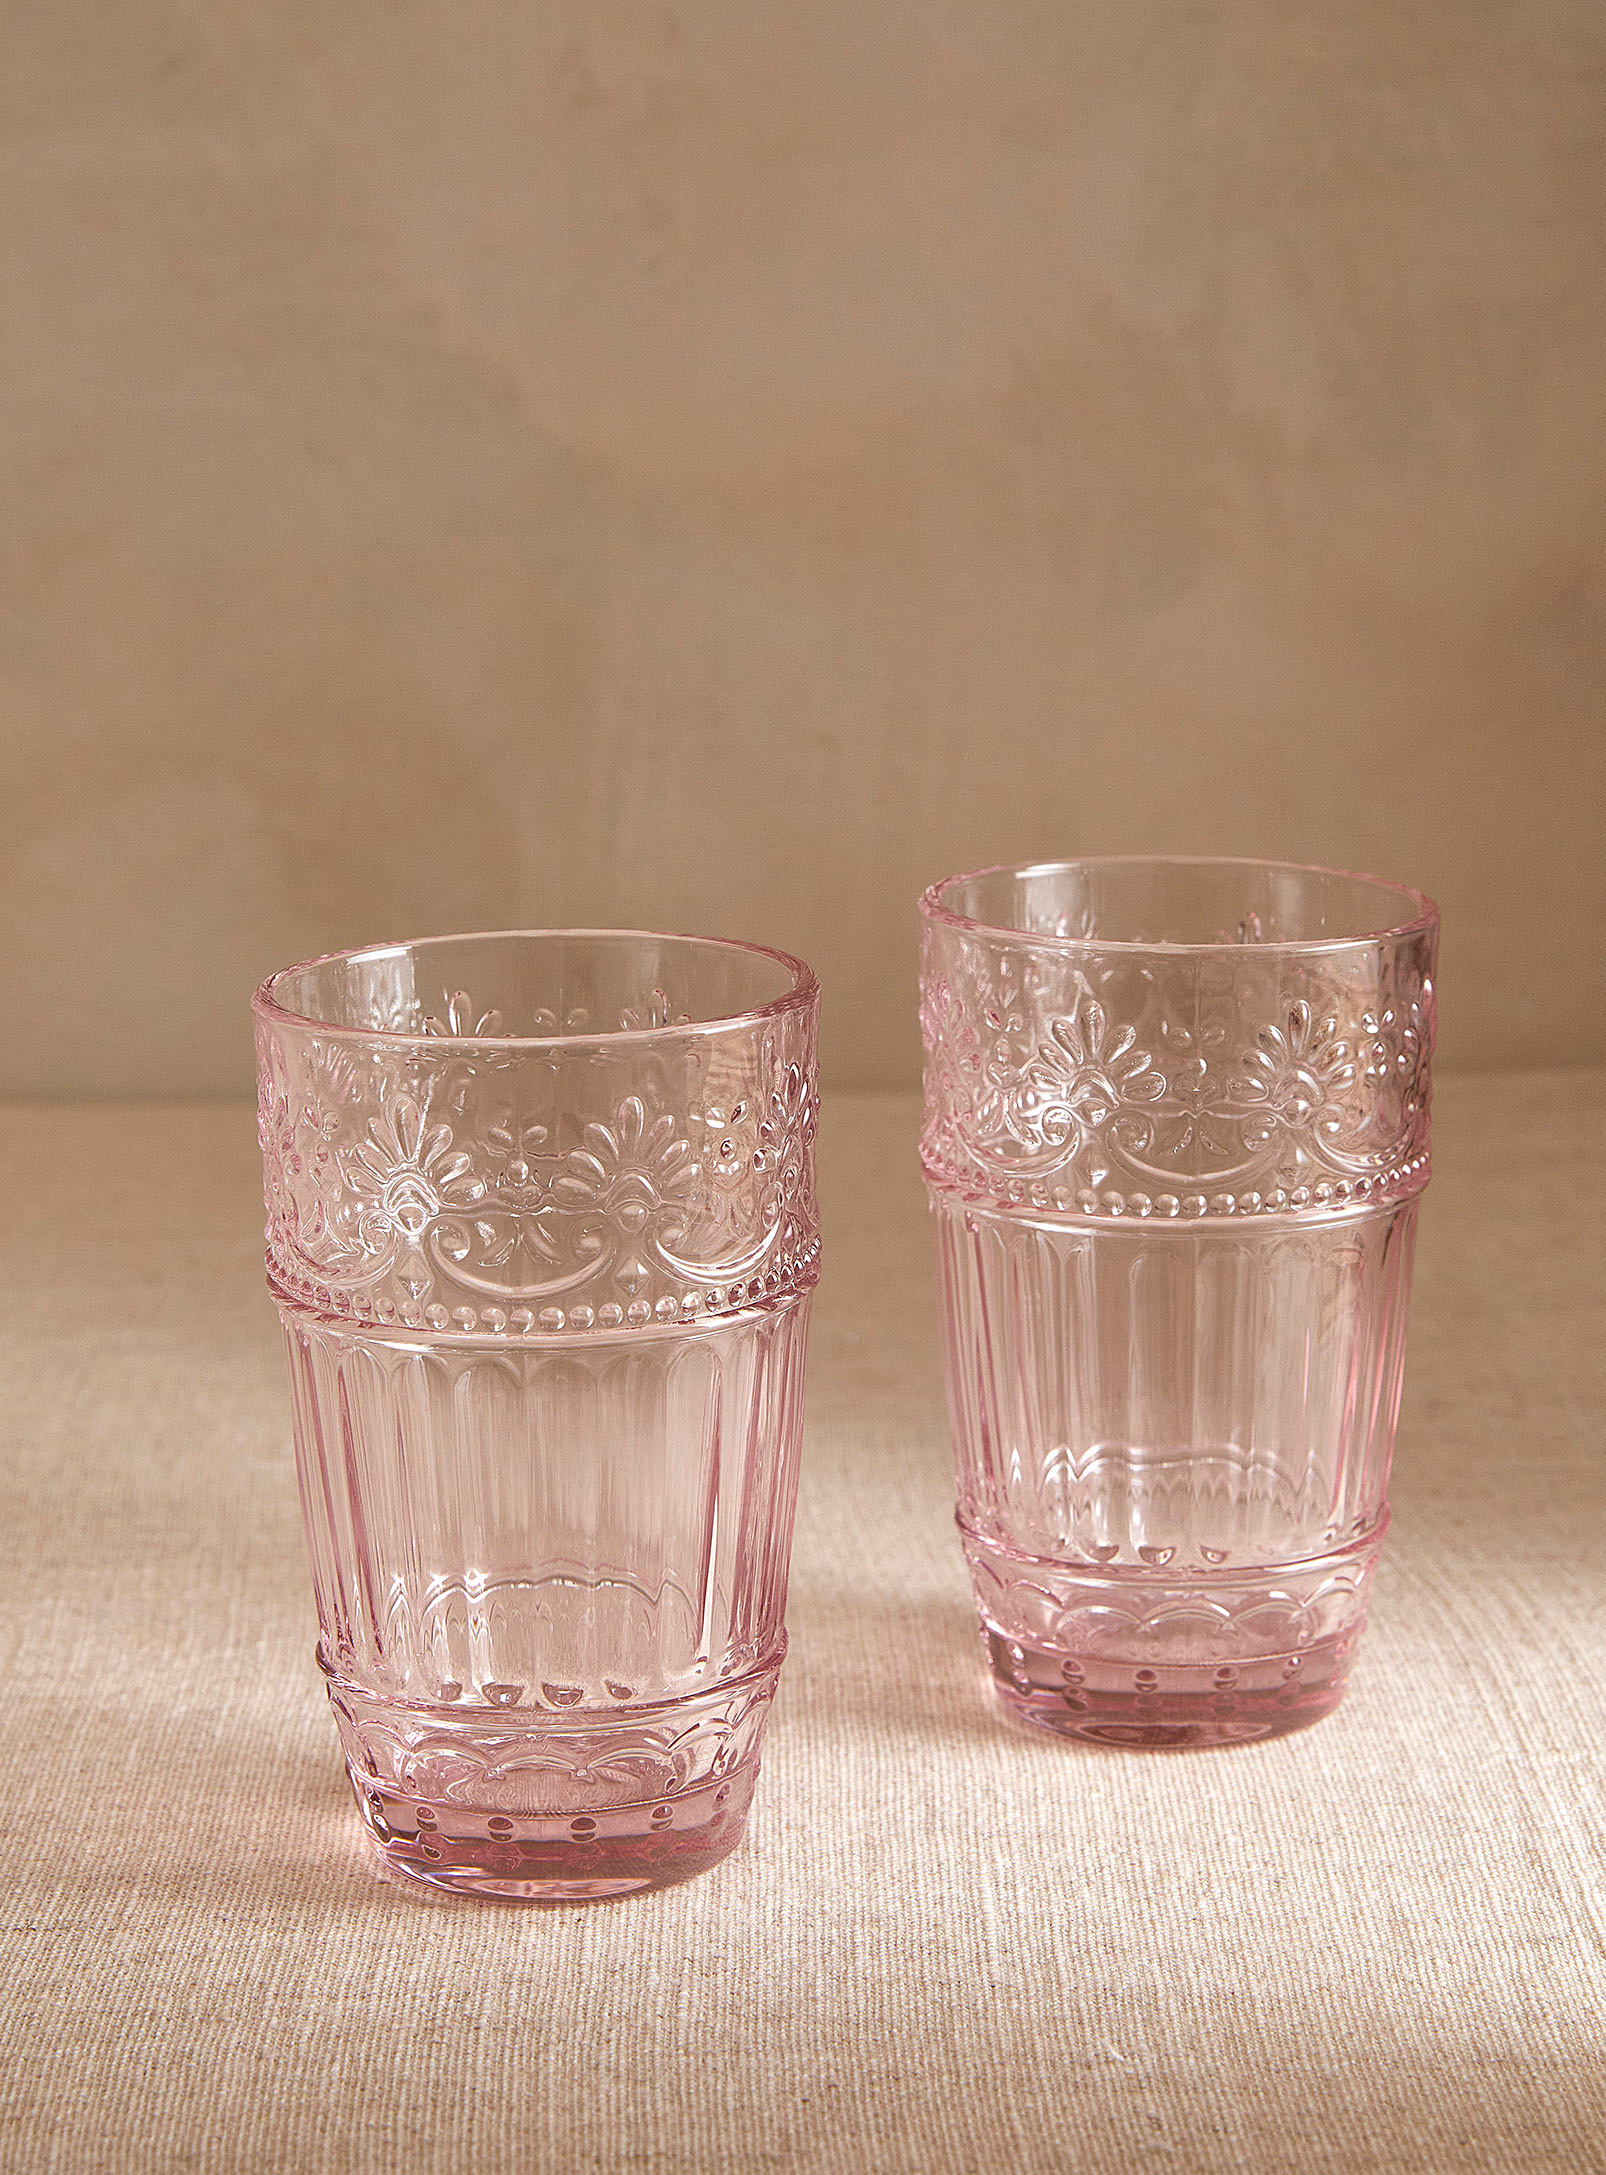 Simons Maison Embossed Floral Highball Glasses Set Of 2 In Pink